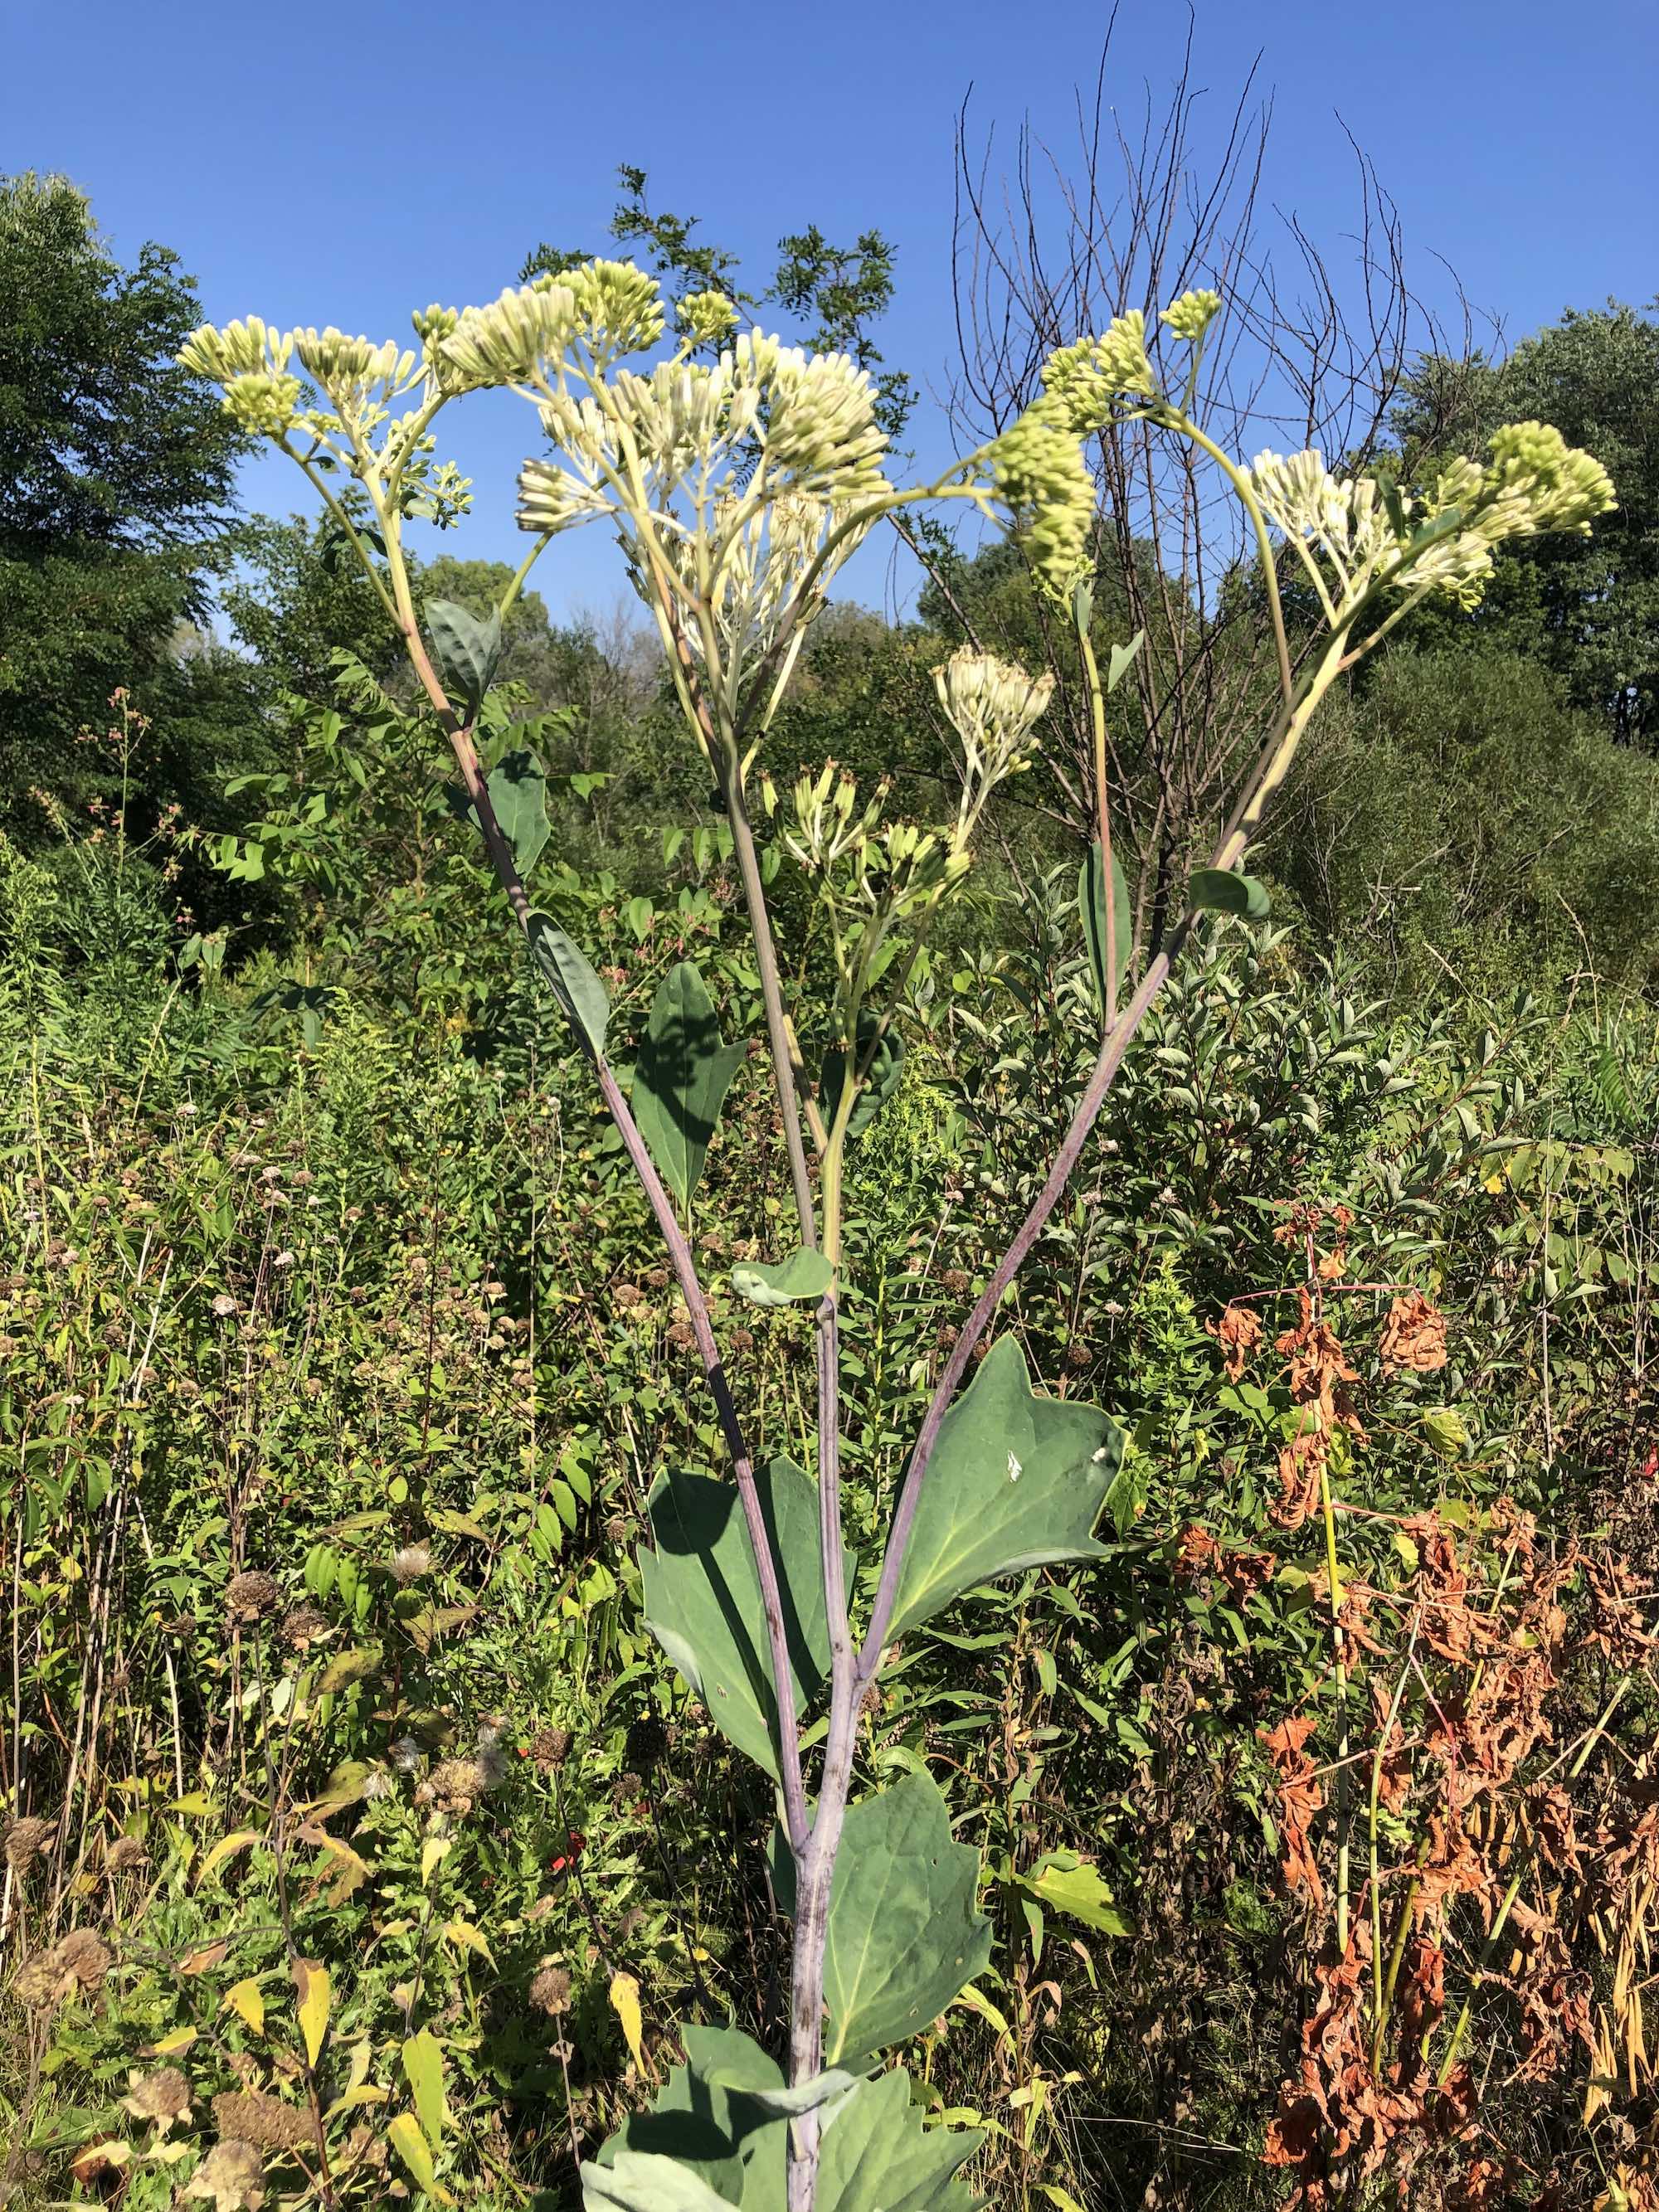 Pale Indian Plantain in Marion Dunn Prairie in Madison, Wisconsin on August 14, 2020.